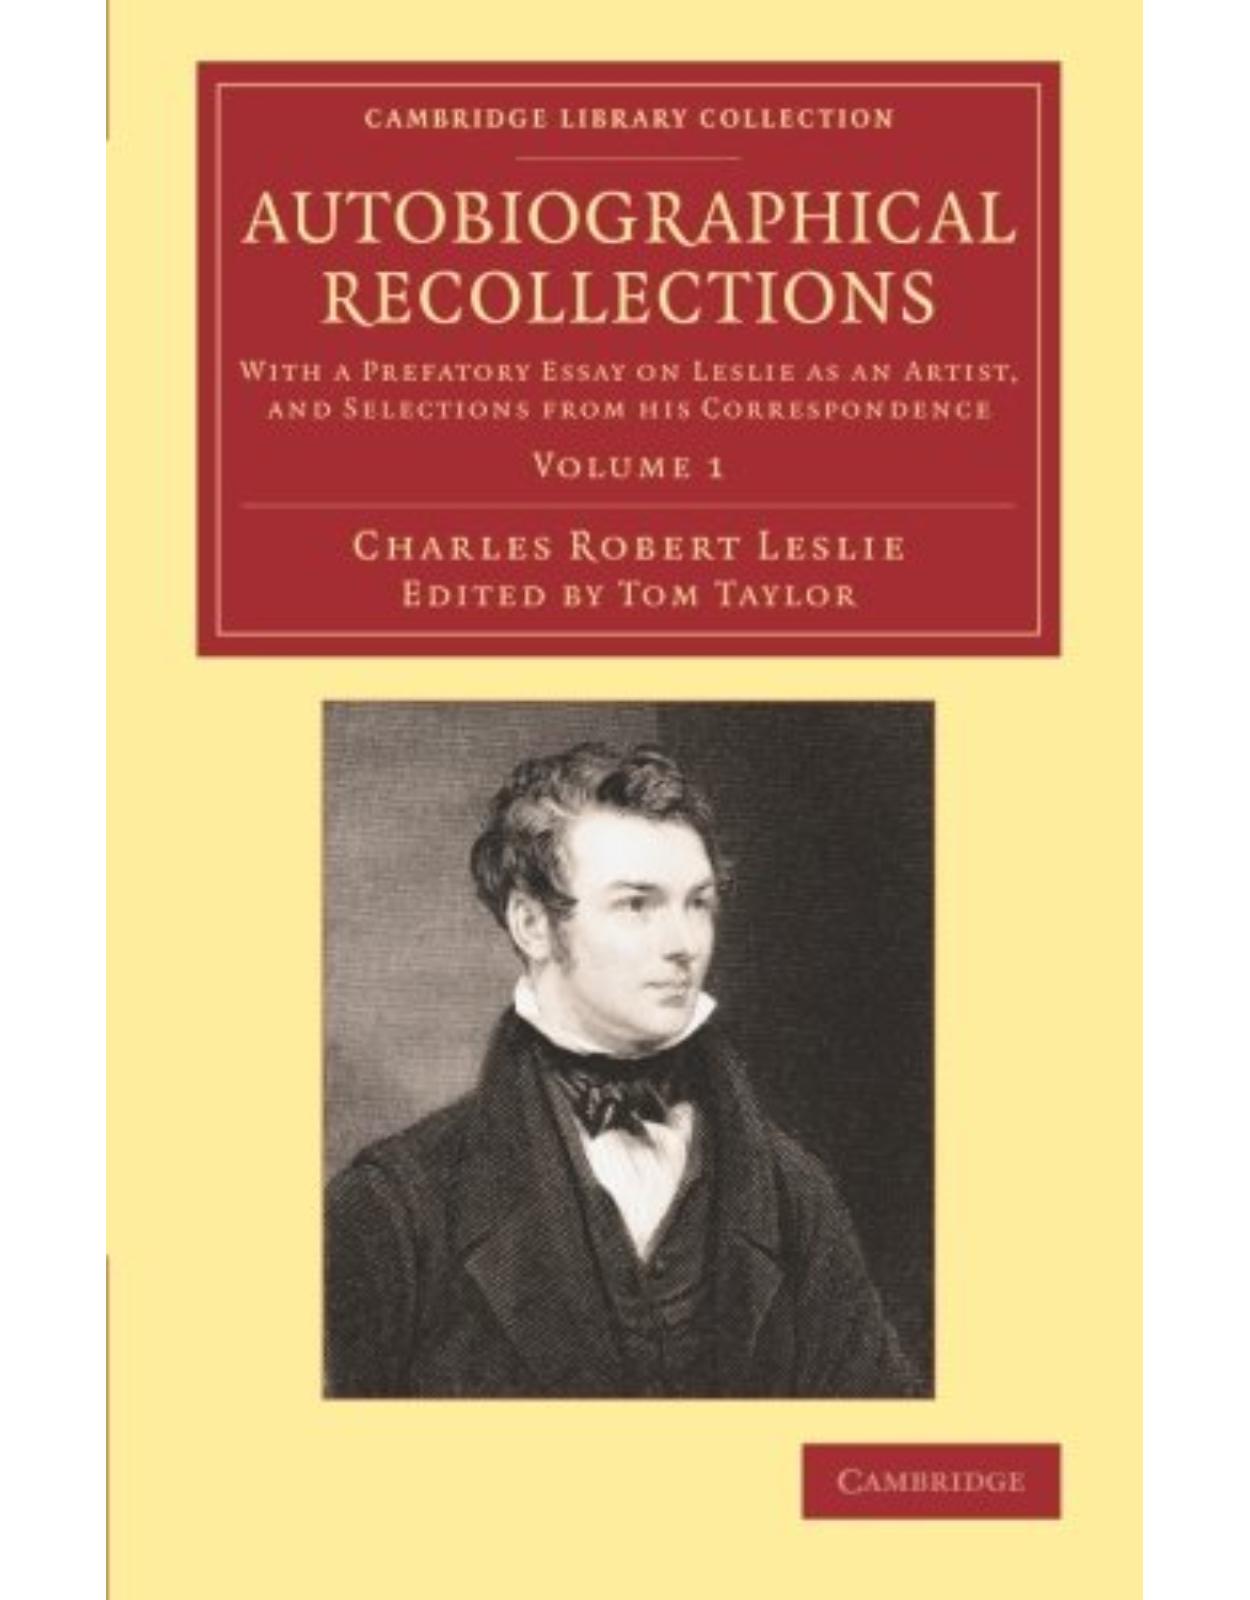 Autobiographical Recollections 2 Volume Set: With a Prefatory Essay on Leslie as an Artist, and Selections from his Correspondence